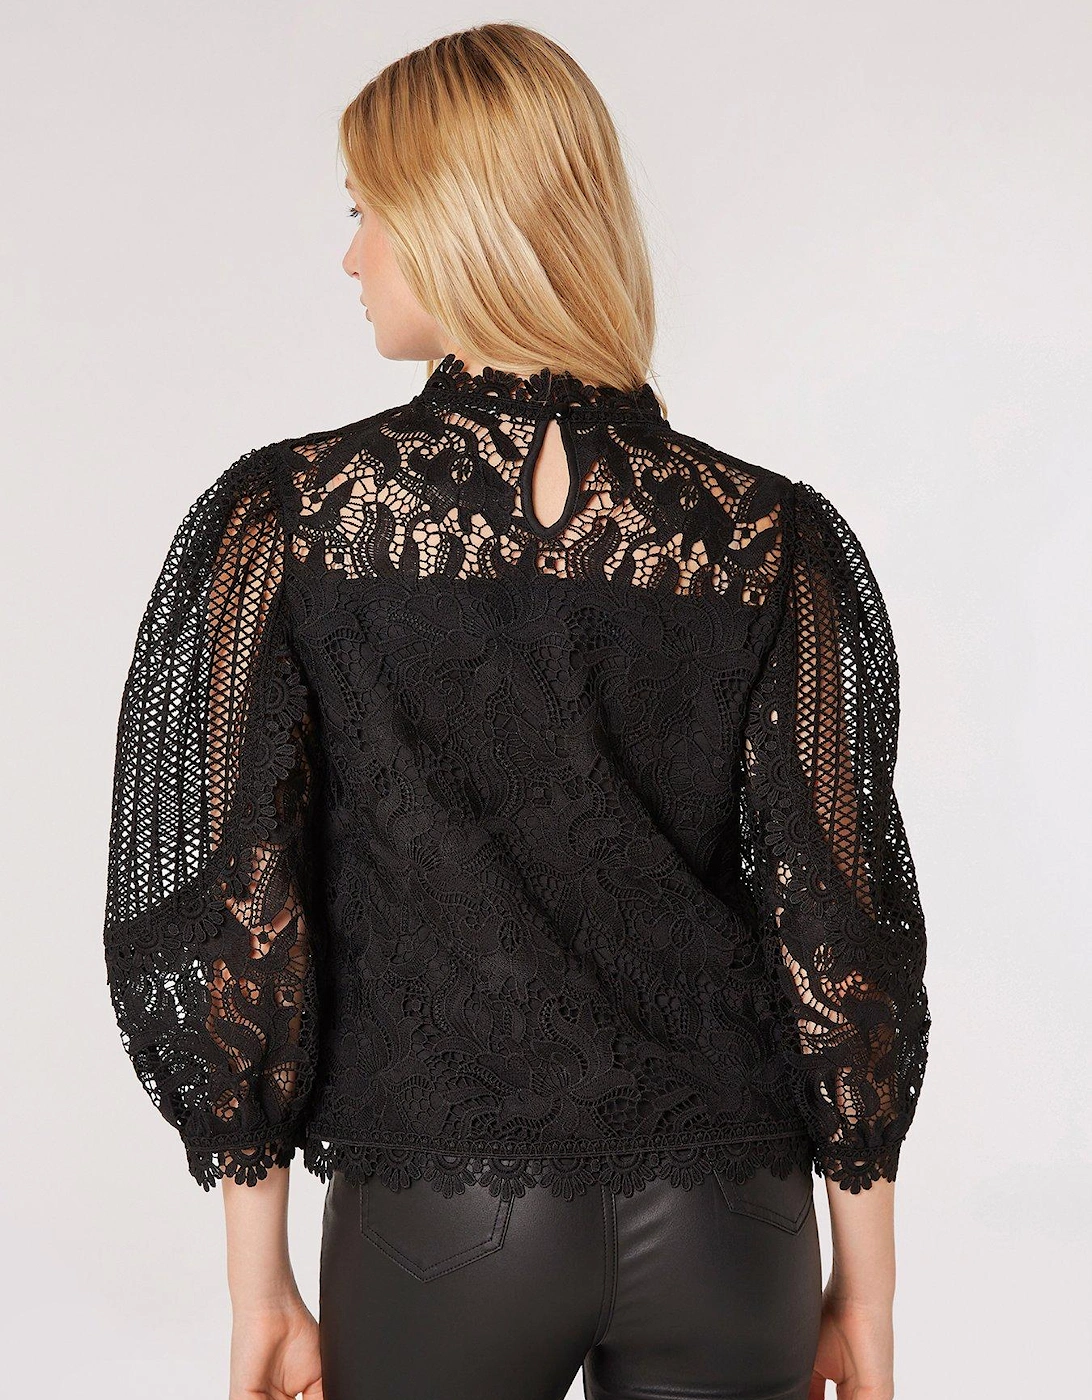 Victoriana Mixed Lace Top